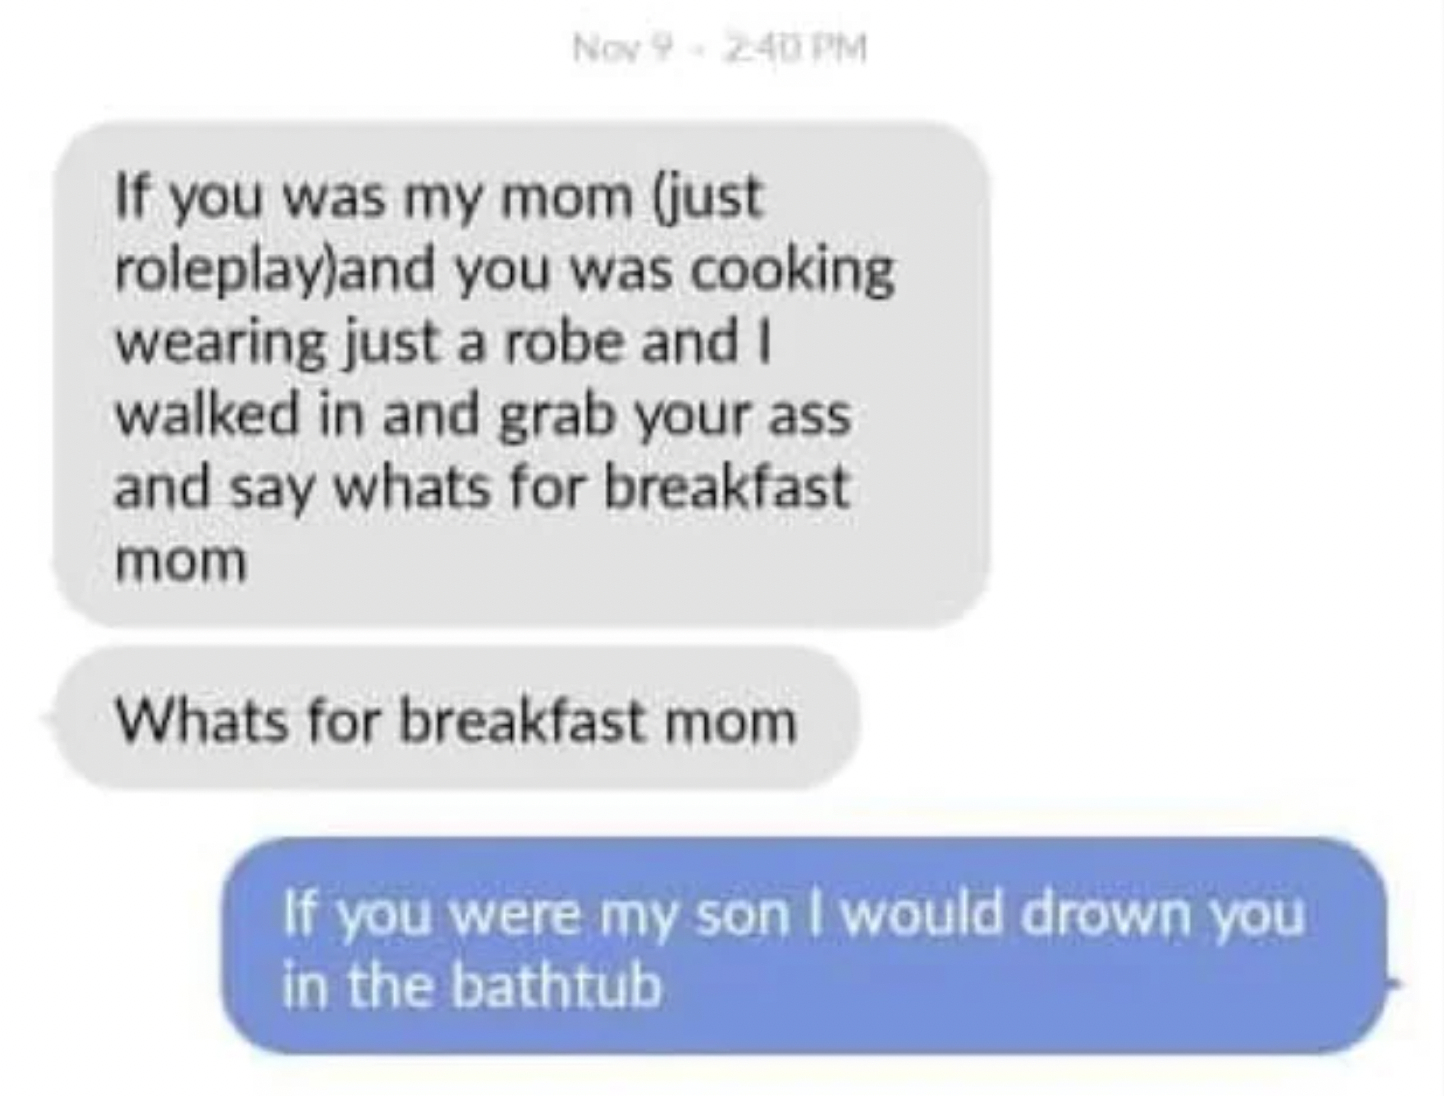 Cringey pics - diagram - Nov 9 If you was my mom just roleplayand you was cooking wearing just a robe and I walked in and grab your ass and say whats for breakfast mom Whats for breakfast mom If you were my son I would drown you in the bathtub